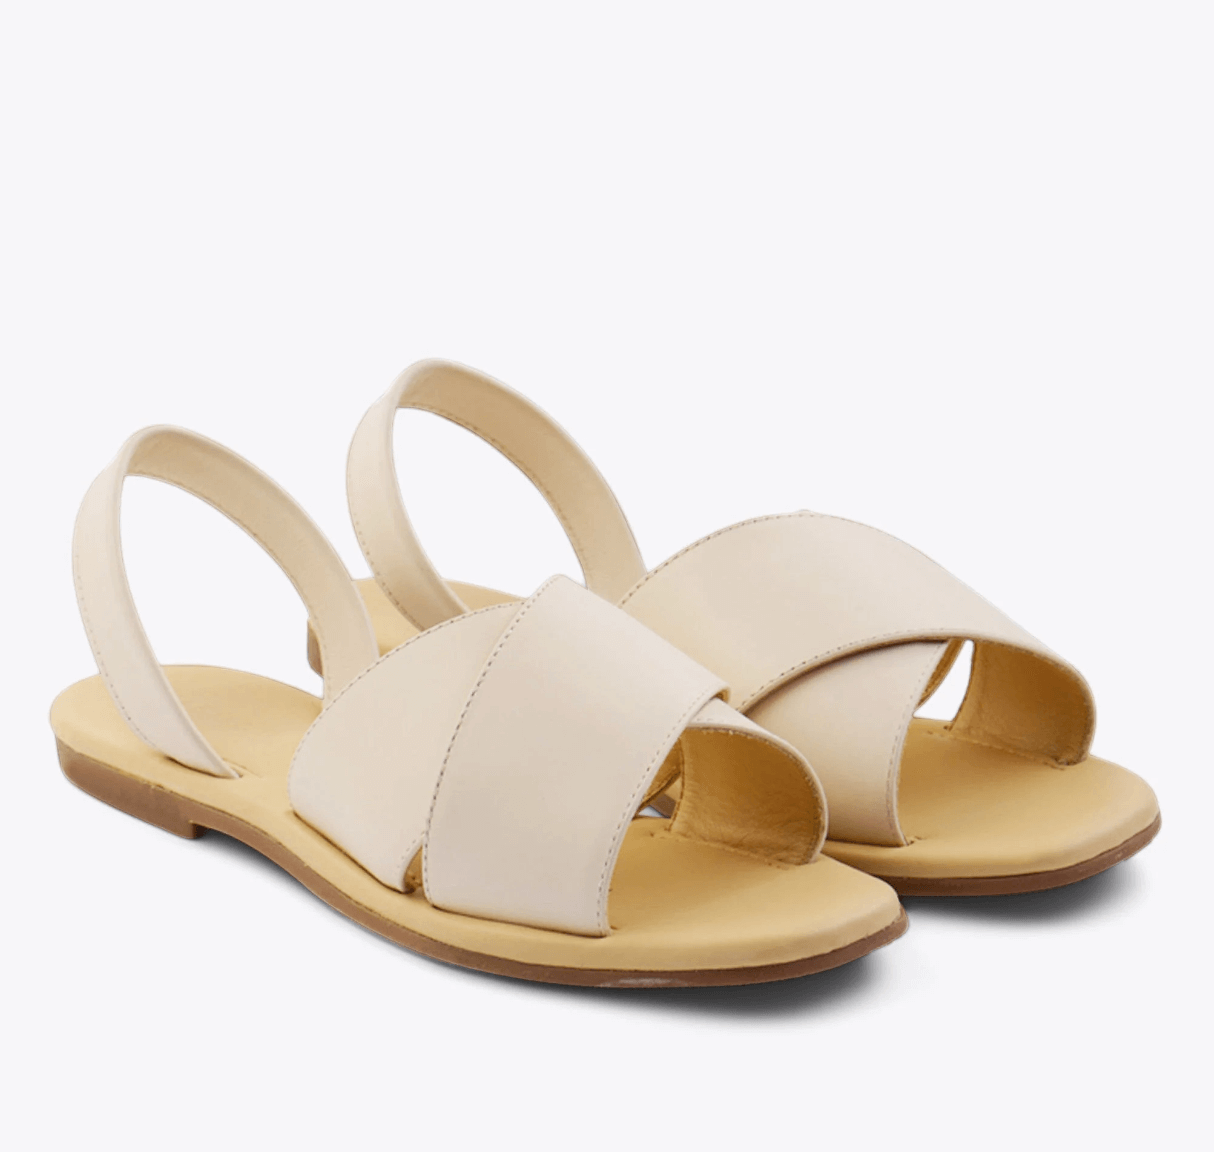 Nisolo white cross sandals with ankle strap